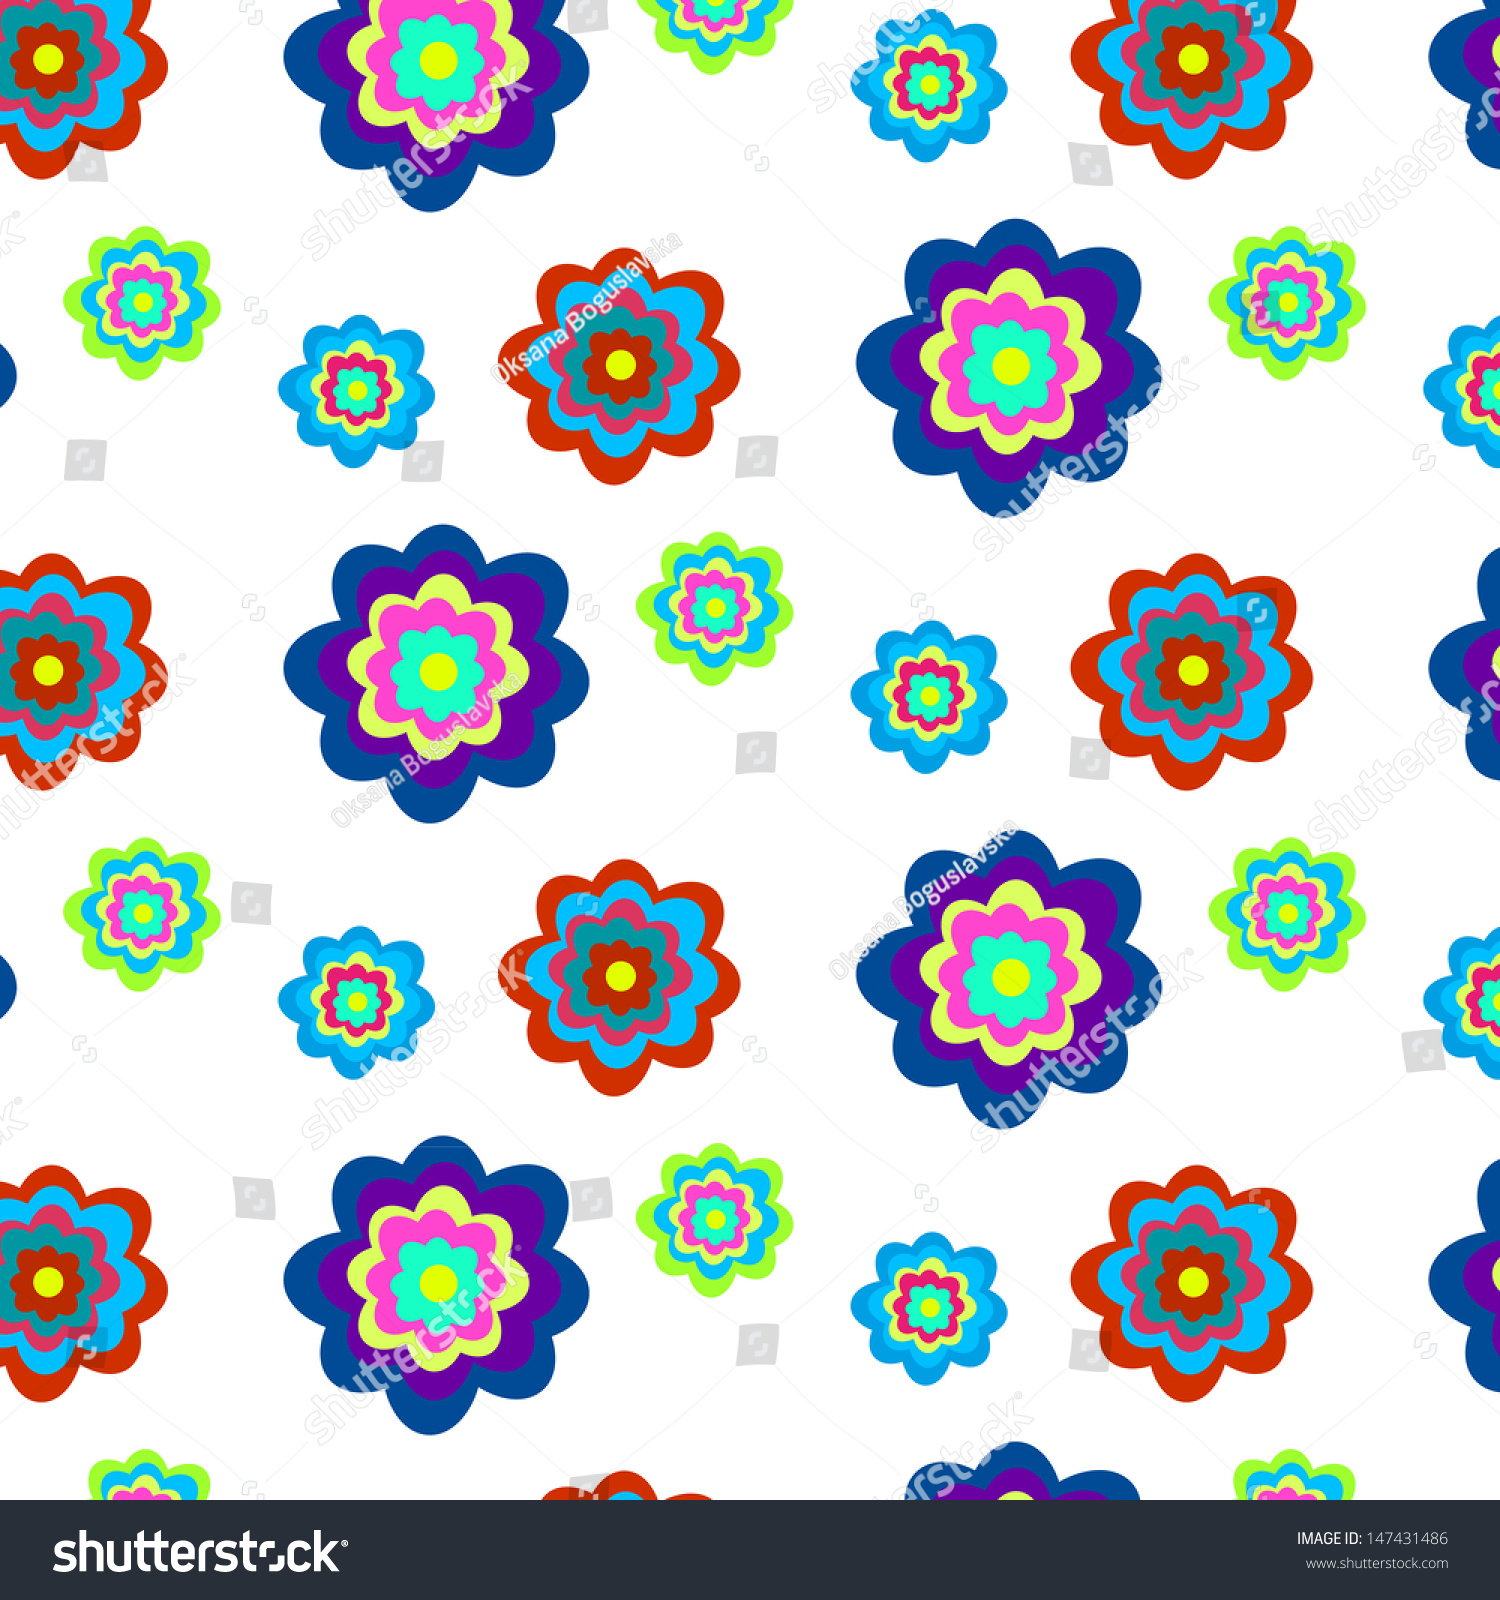 Seamless pattern with flowers. Template for design and decoration, wrapping paper, package, greeting cards etc. #147431486